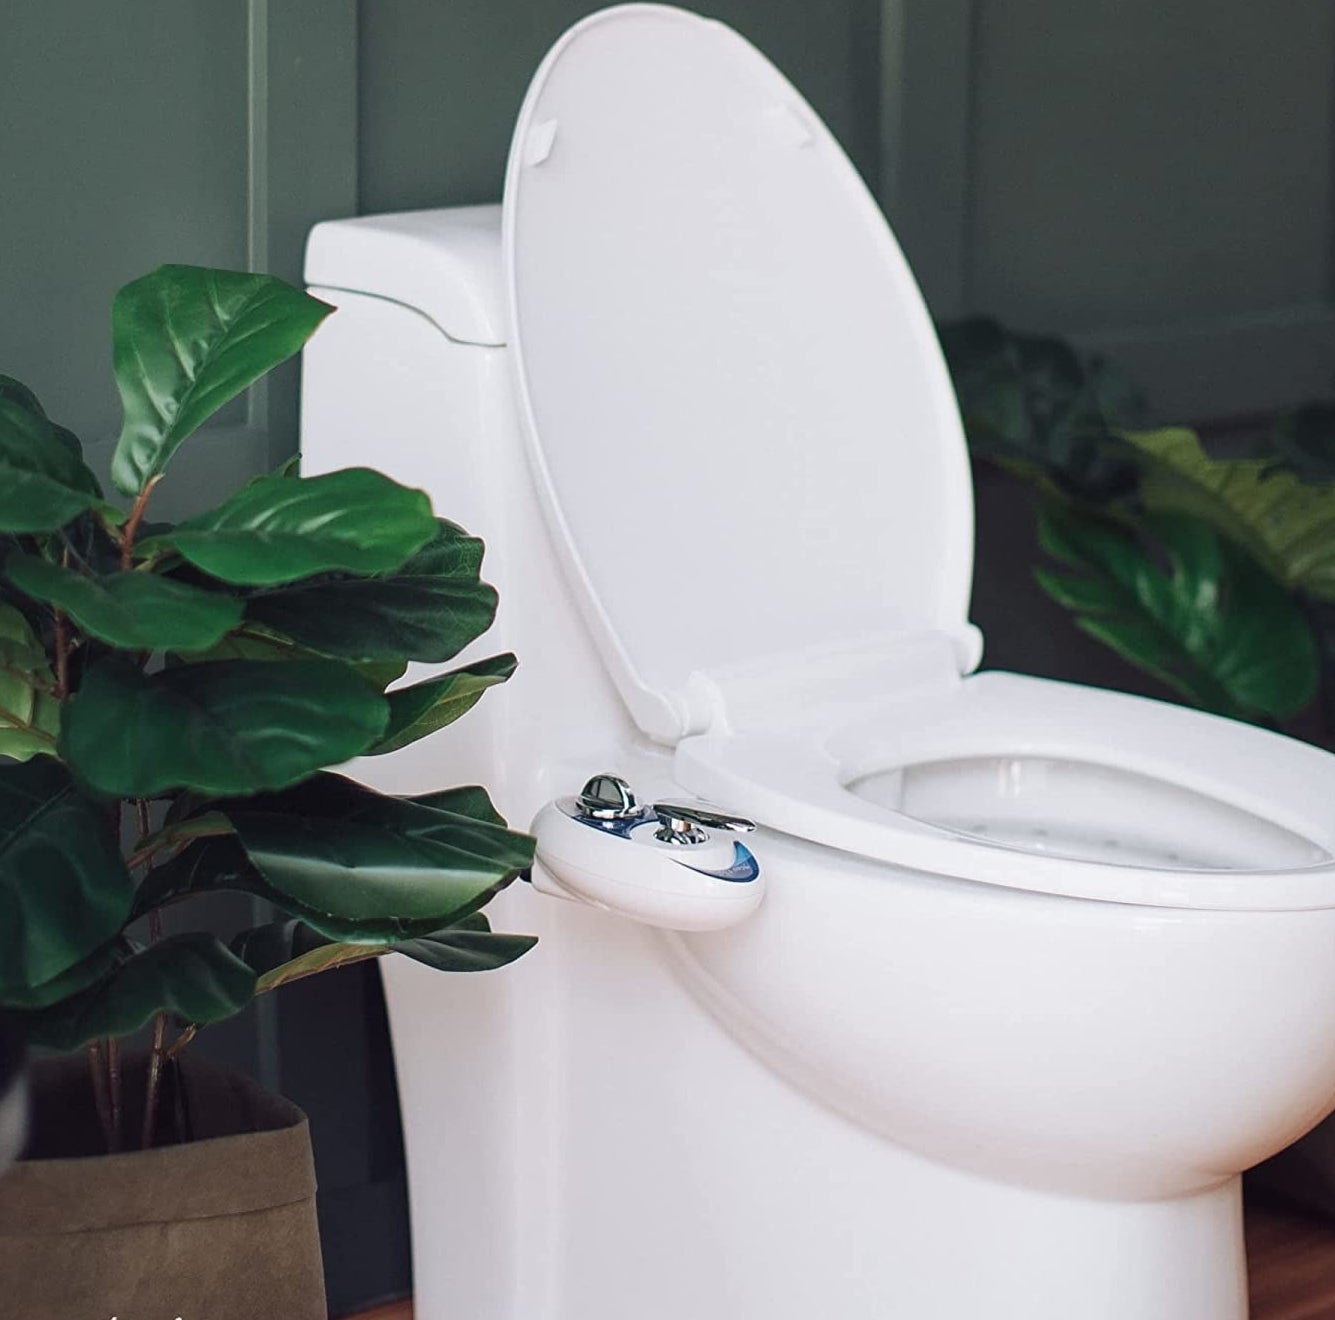 toilet with bidet surrounded by plants